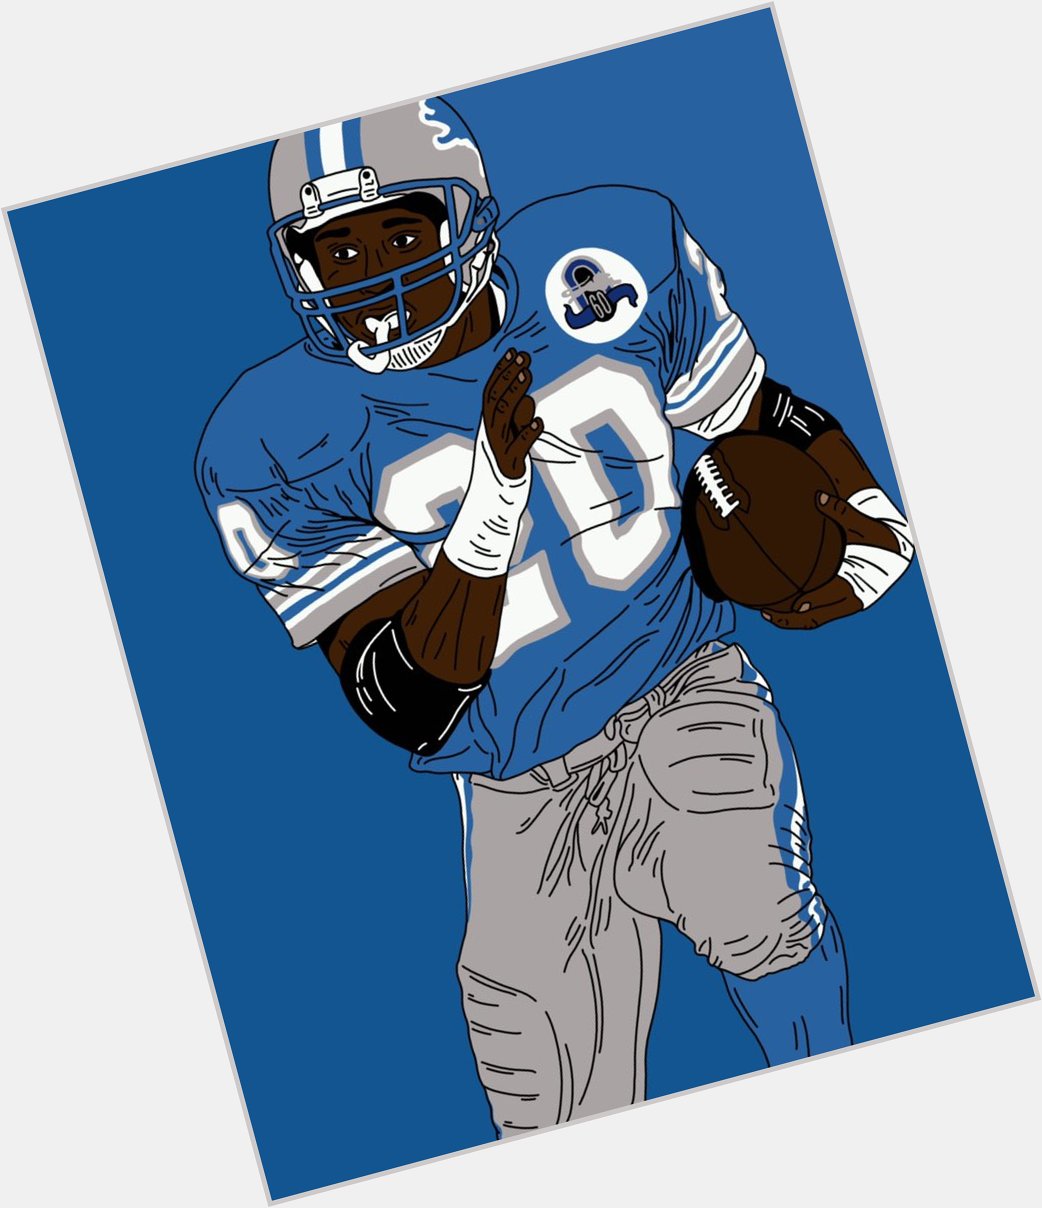 Happy birthday Barry Sanders, will never forget your moves.
Image by 